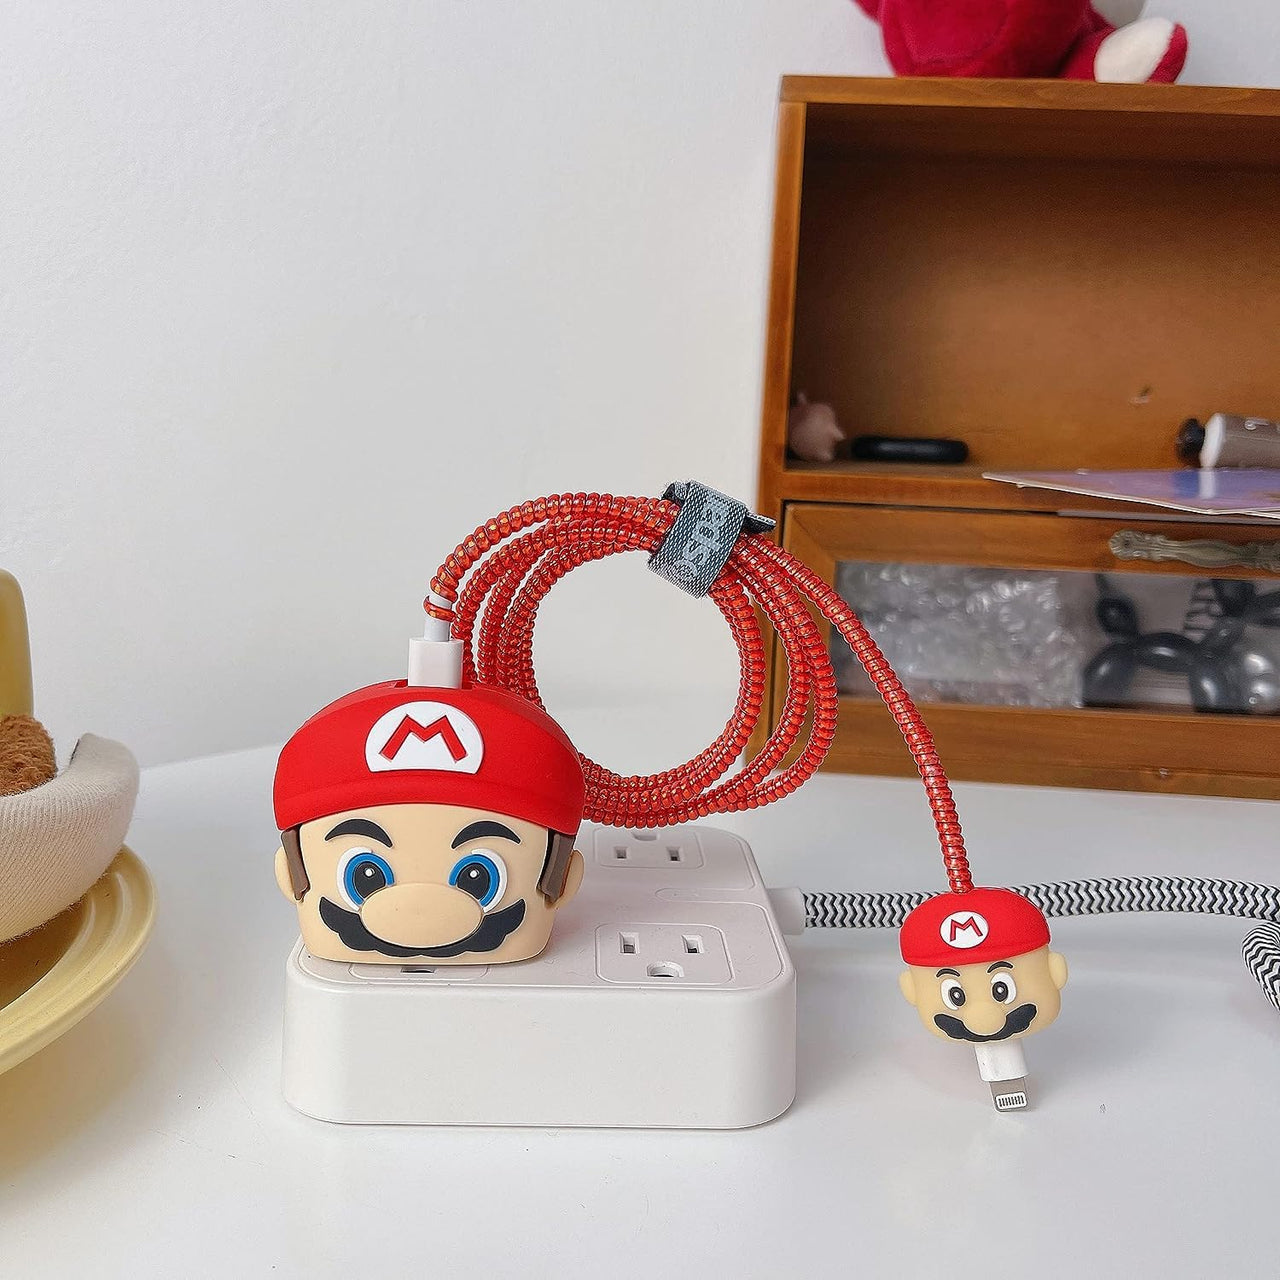 Classic Mario Silicon Apple iPhone Charger Case